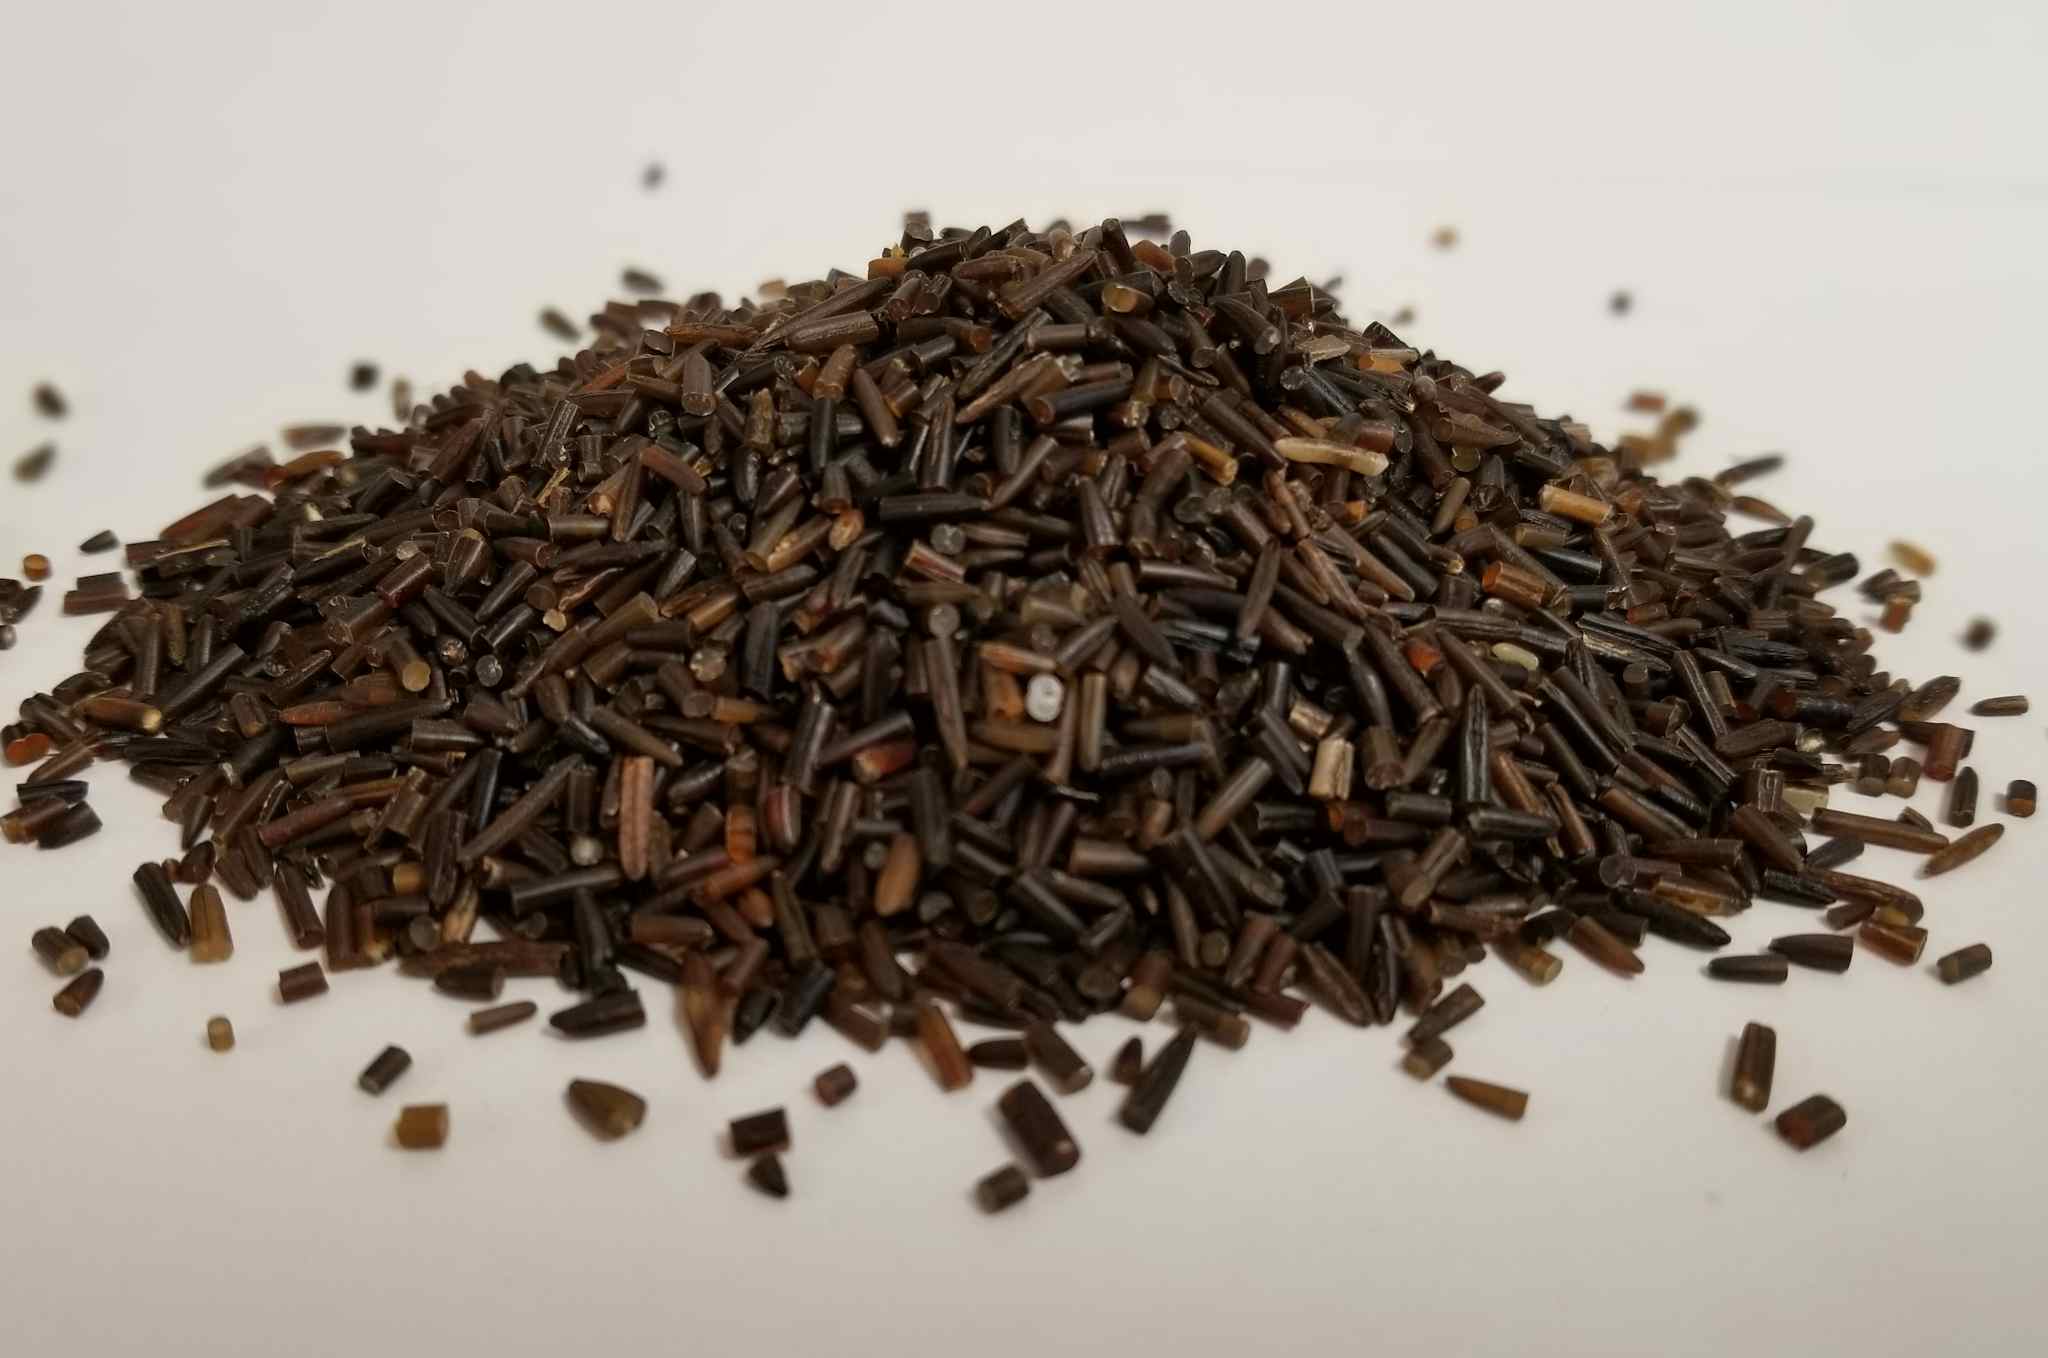 7.5lbs of Roll Cut Wild Rice - Minnesota Cultivated Regular Parched